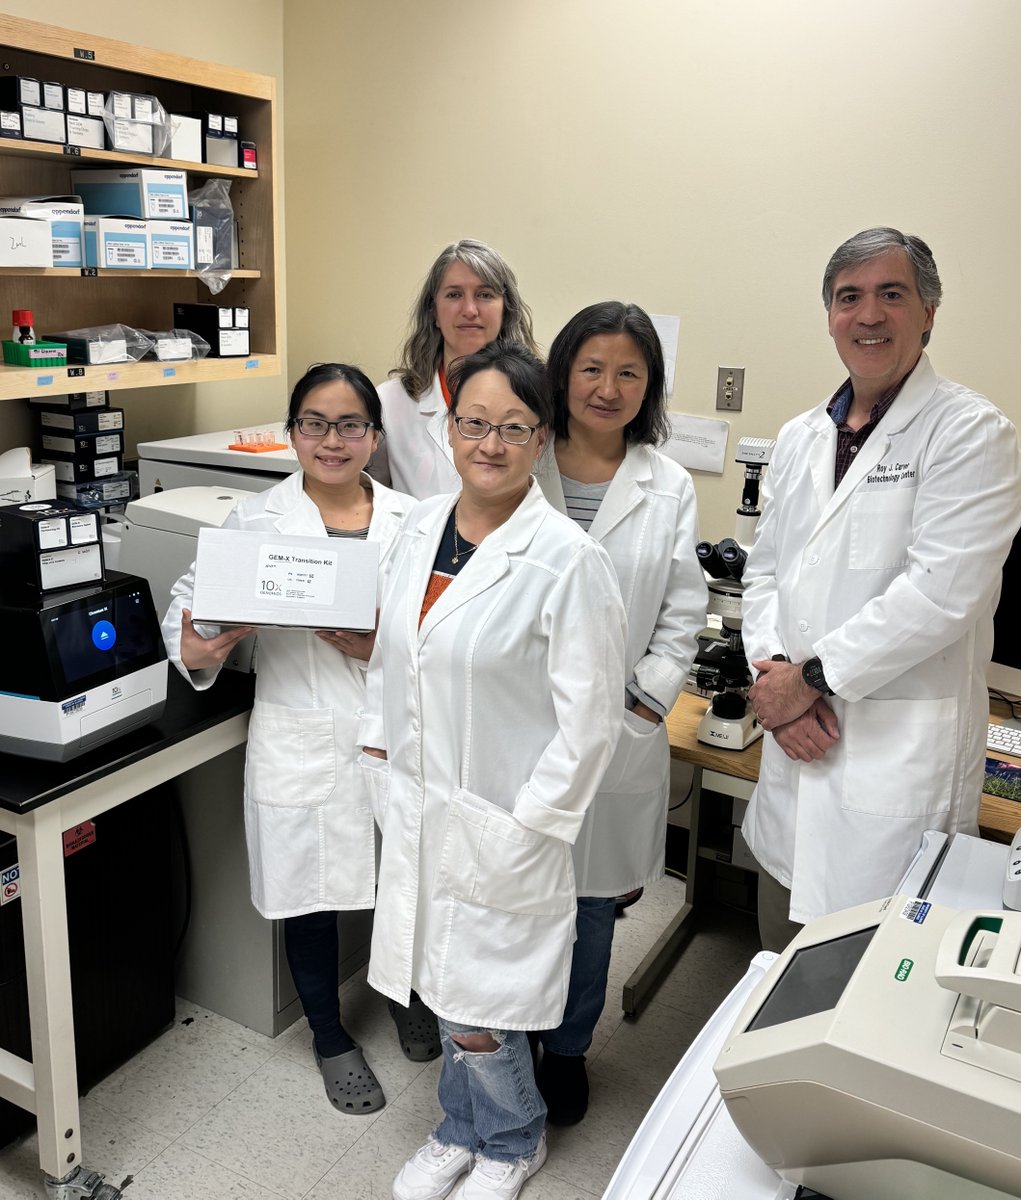 The University of Illinois DNA Services Core recently upgraded to our new #scRNAseq assays, powered by GEM-X. They told us they are just as excited as their users to push the boundaries of discovery. We can’t wait to see what #GenerationGEMX discovers!